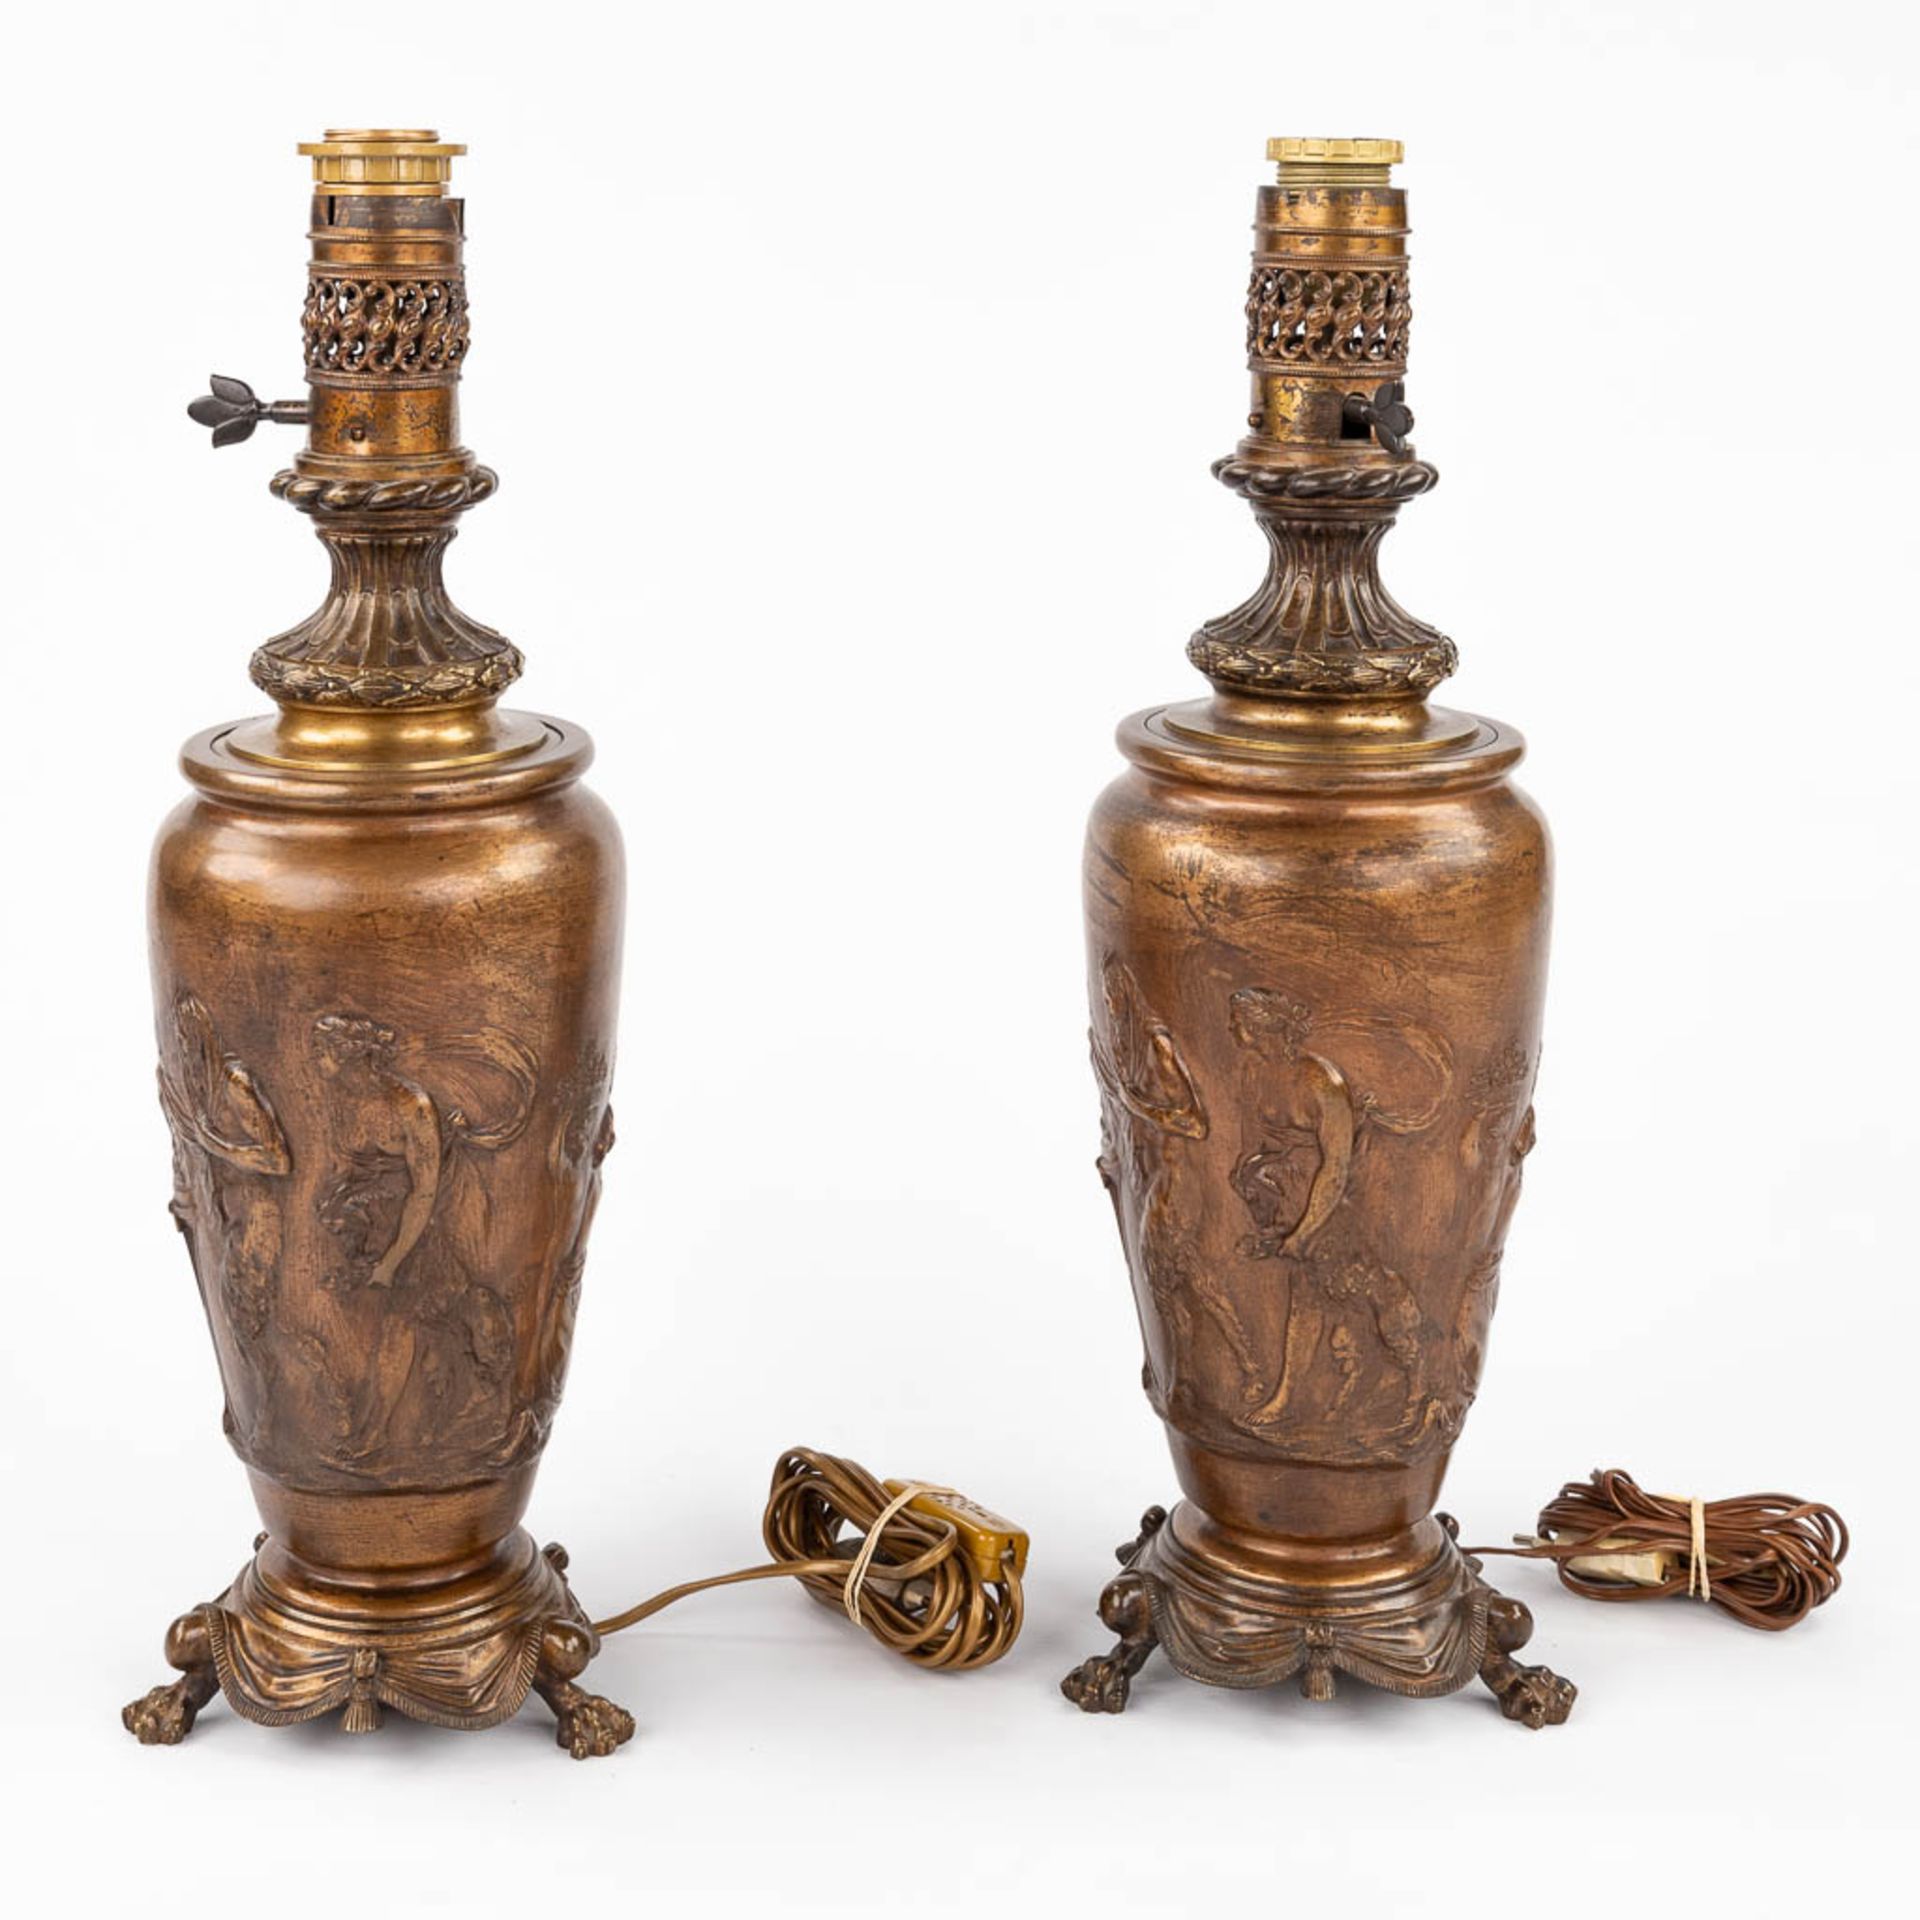 CLODION (1738-1814) 'Pair of oil lamps' bronze decorated with Satyrs and Nymphs. 19th C. (H:55 x D:1 - Bild 4 aus 14